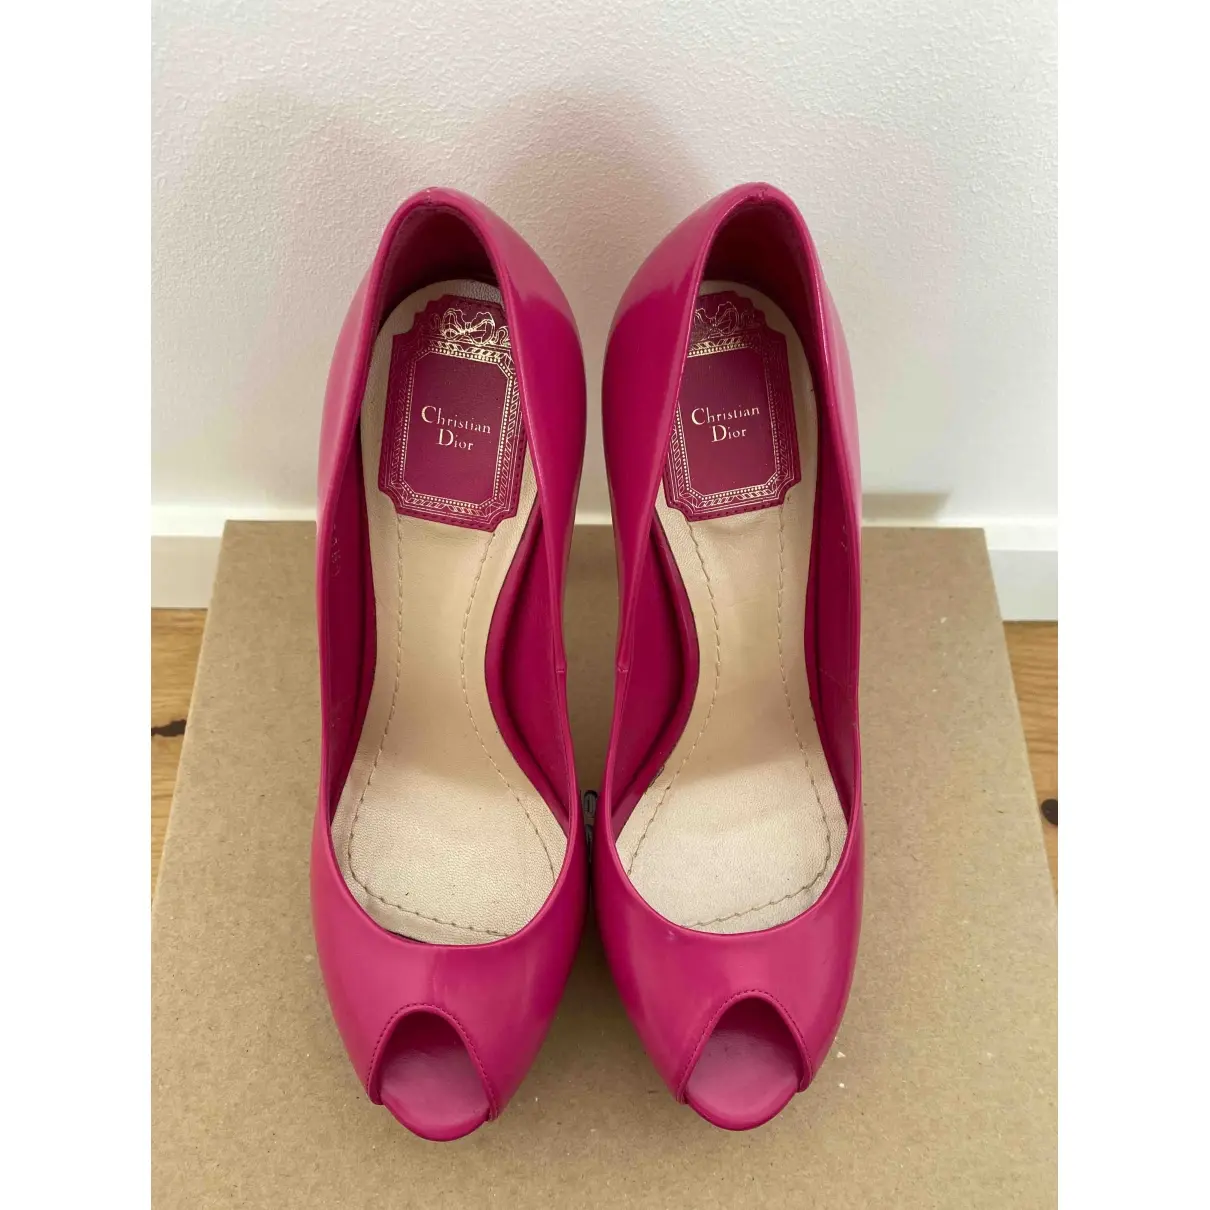 Dior Miss Dior Peep Toes leather heels for sale